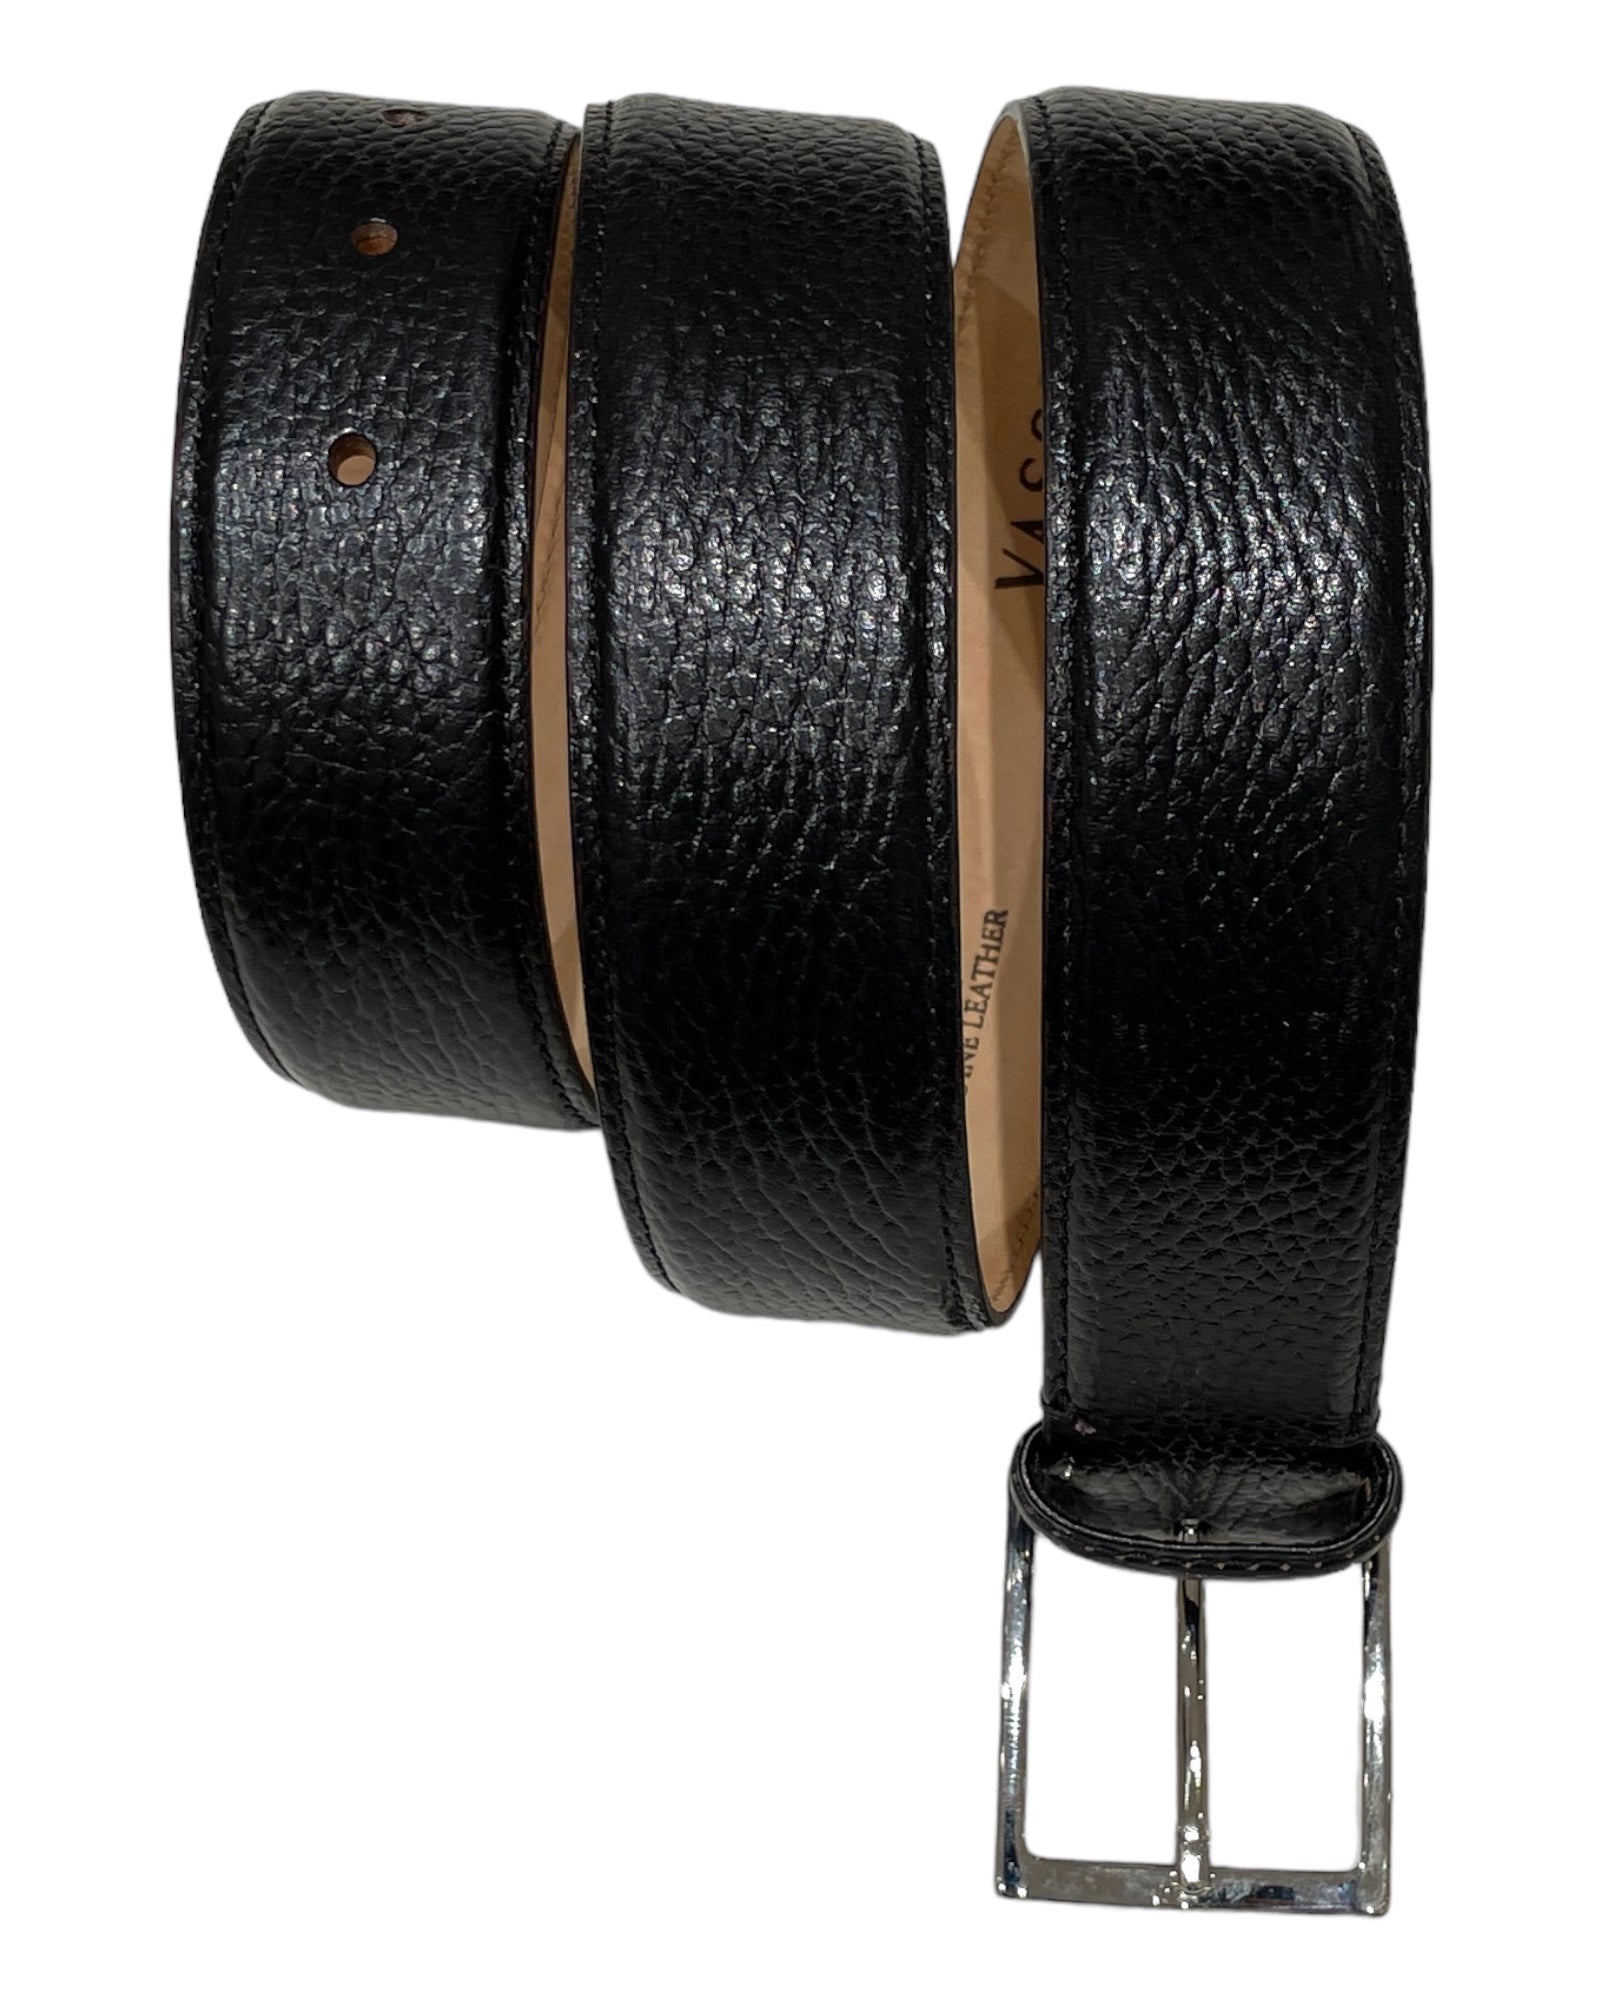 BISON PRINT LEATHER BLACK WITH SILVER BUCKLE - VASSI